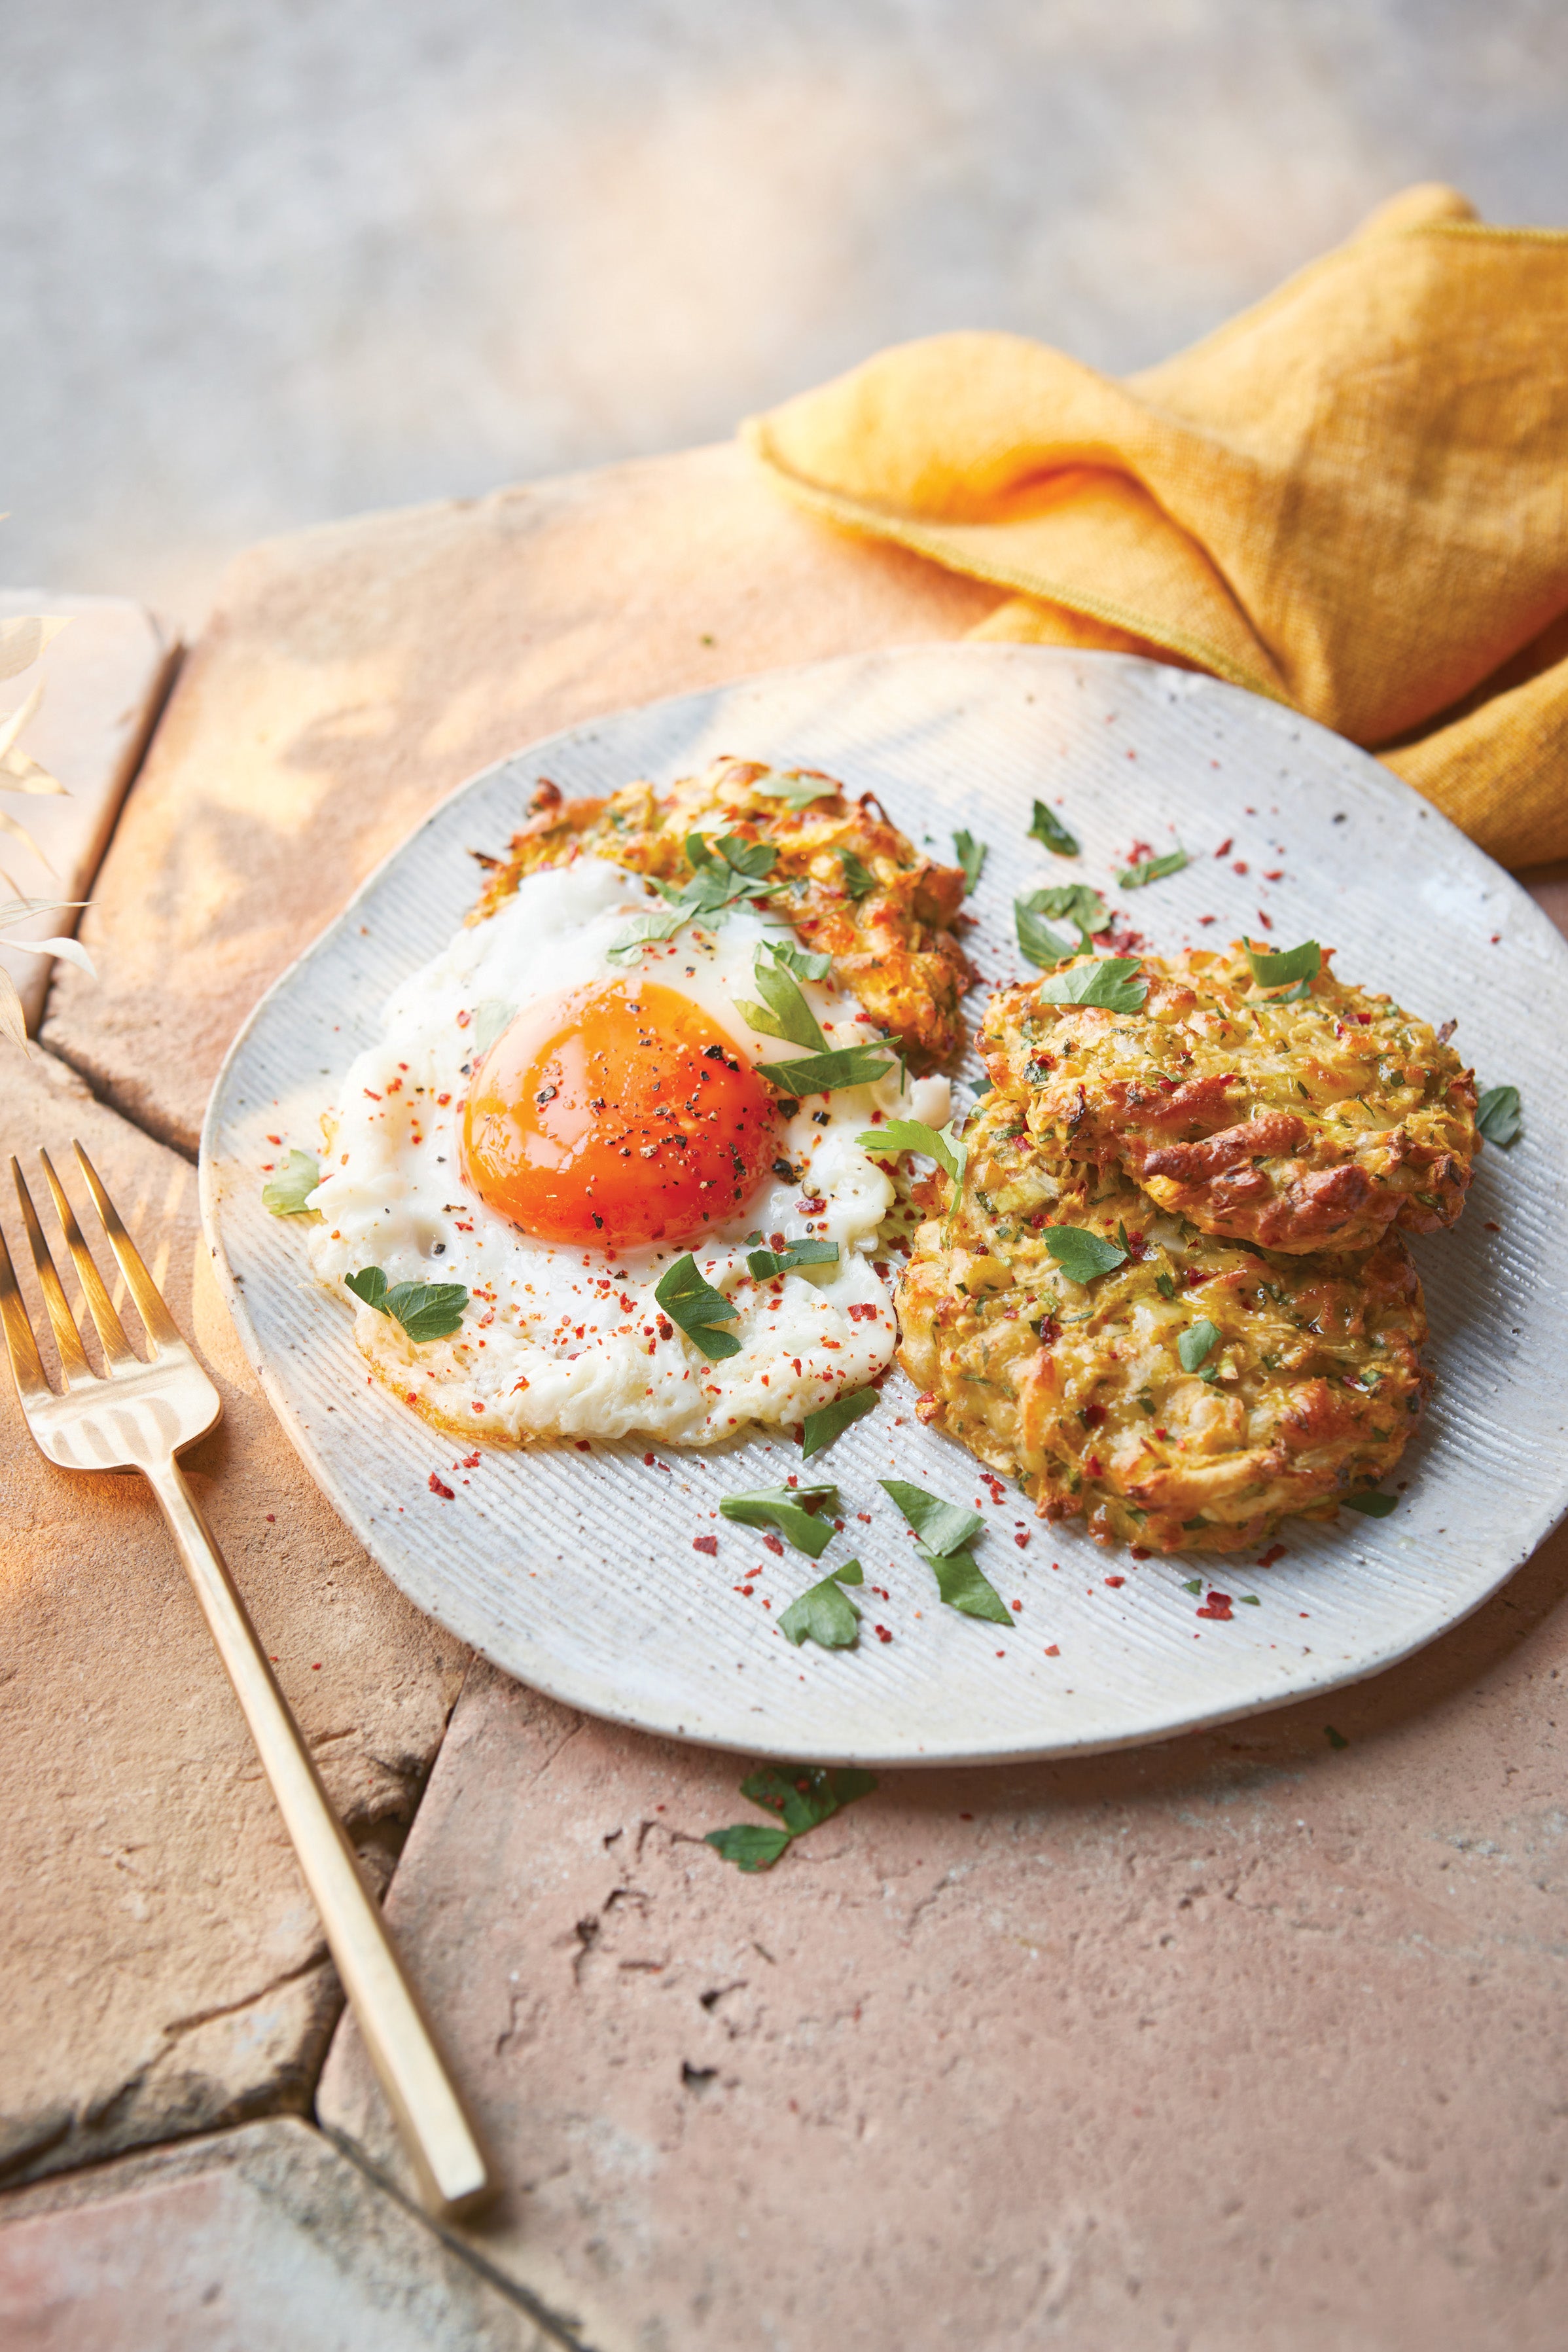 Add a fried egg on top for an easy midweek meal